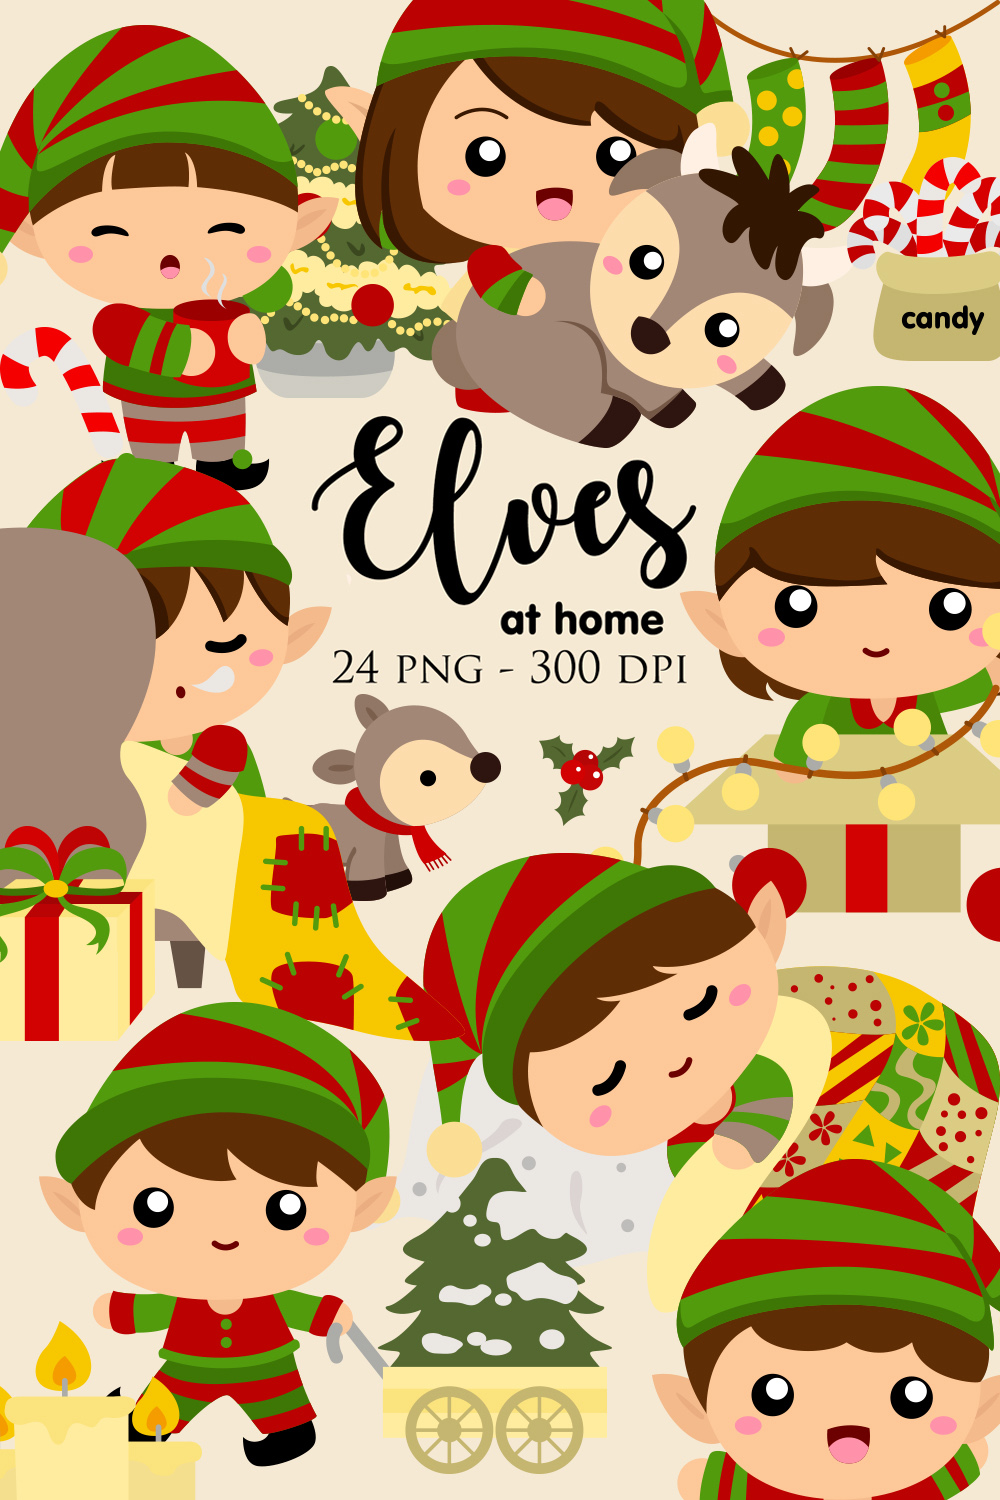 Colorful Christmas Elf Kids Girl Boy Character At Home Cartoon Illustration Vector Clipart Sticker Decoration Background pinterest preview image.